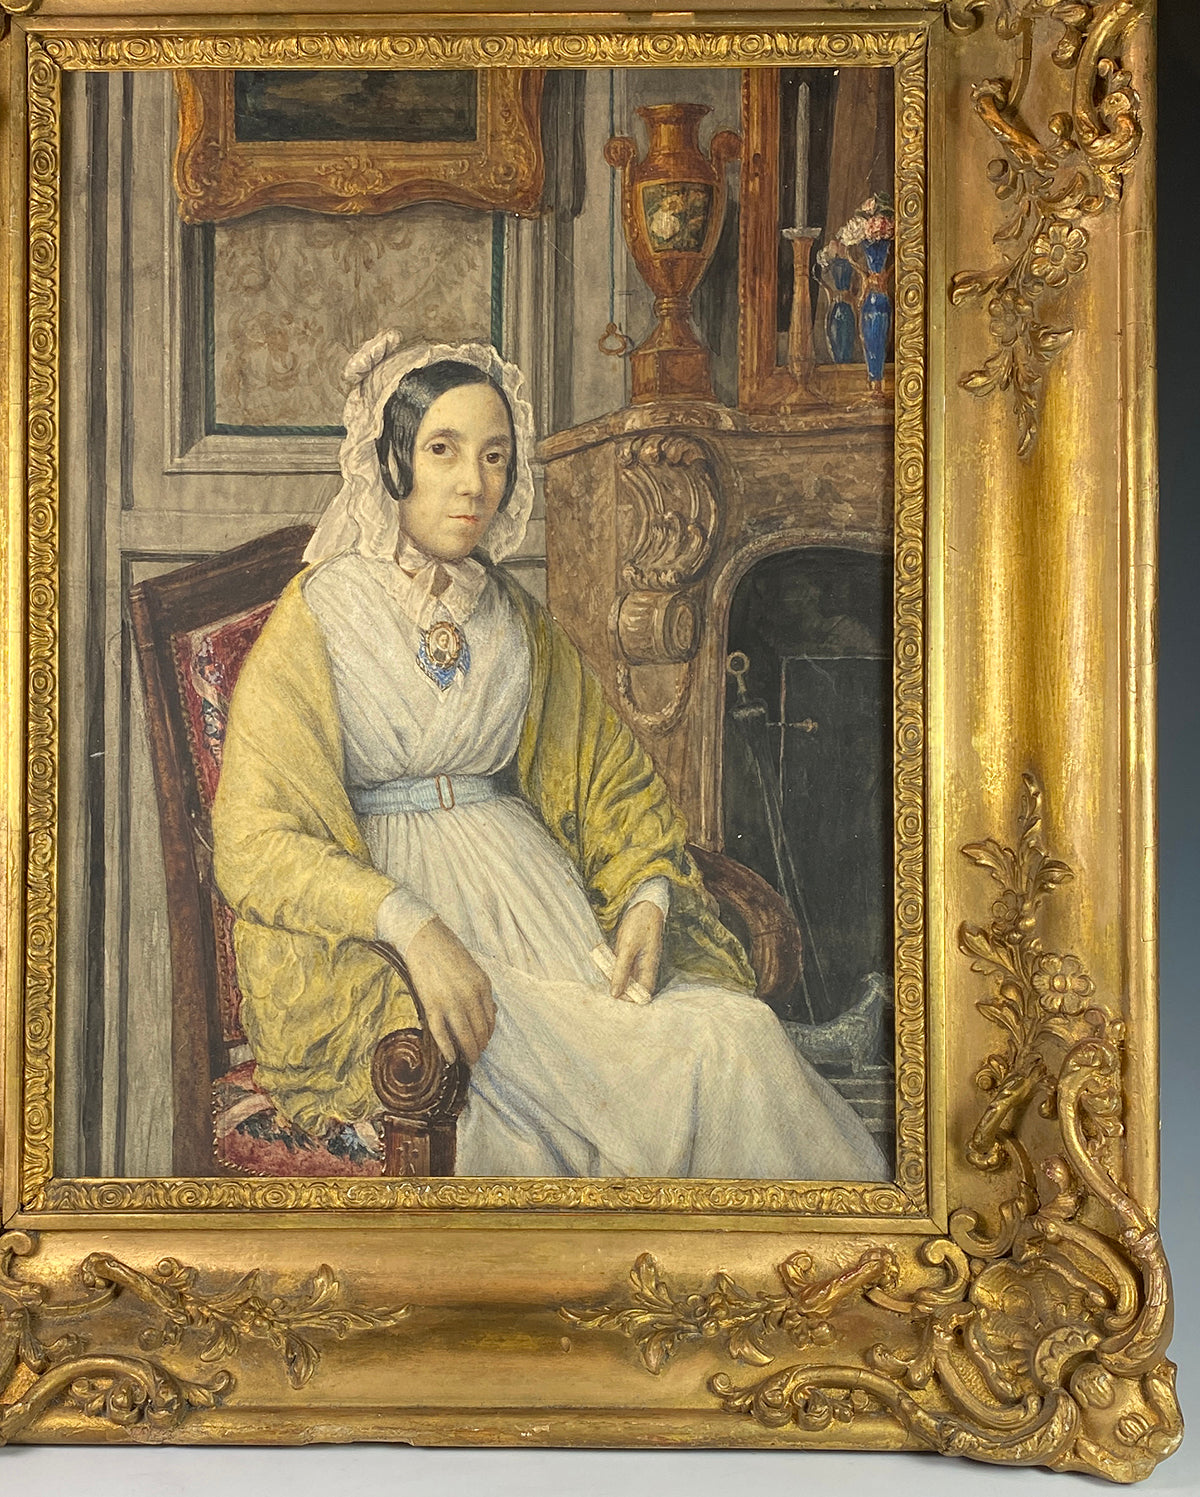 Fine Antique French 18.5" x 15.5" Framed Portrait in Interior, Mother with Miniature of Child, c.1820-30s